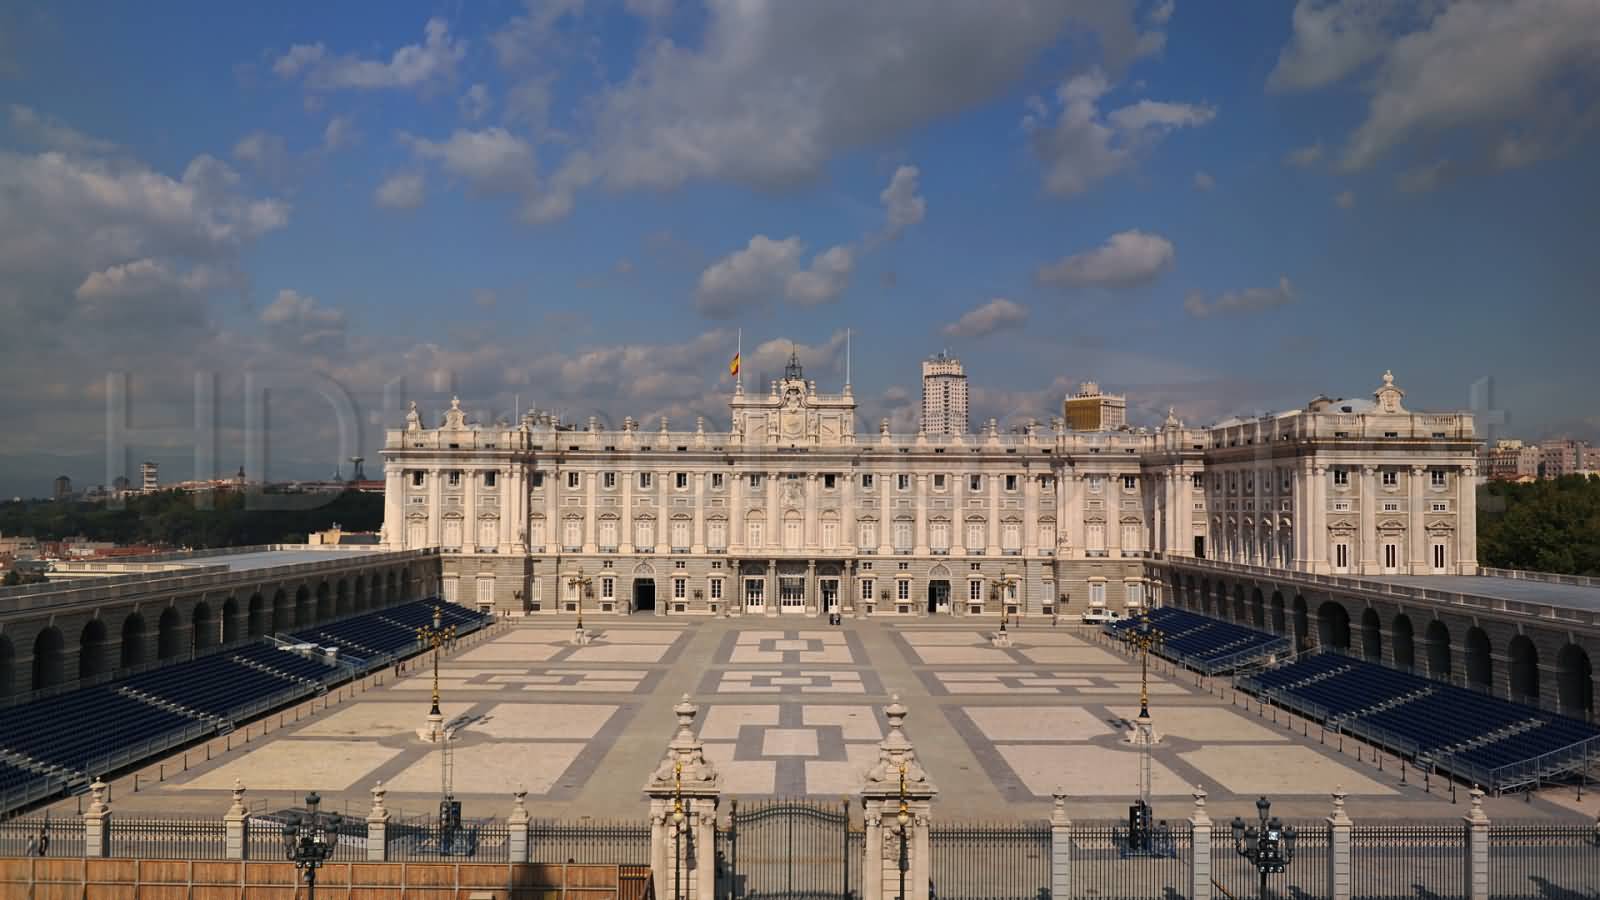 Facade Of The Royal Palace Of Madrid In Spain